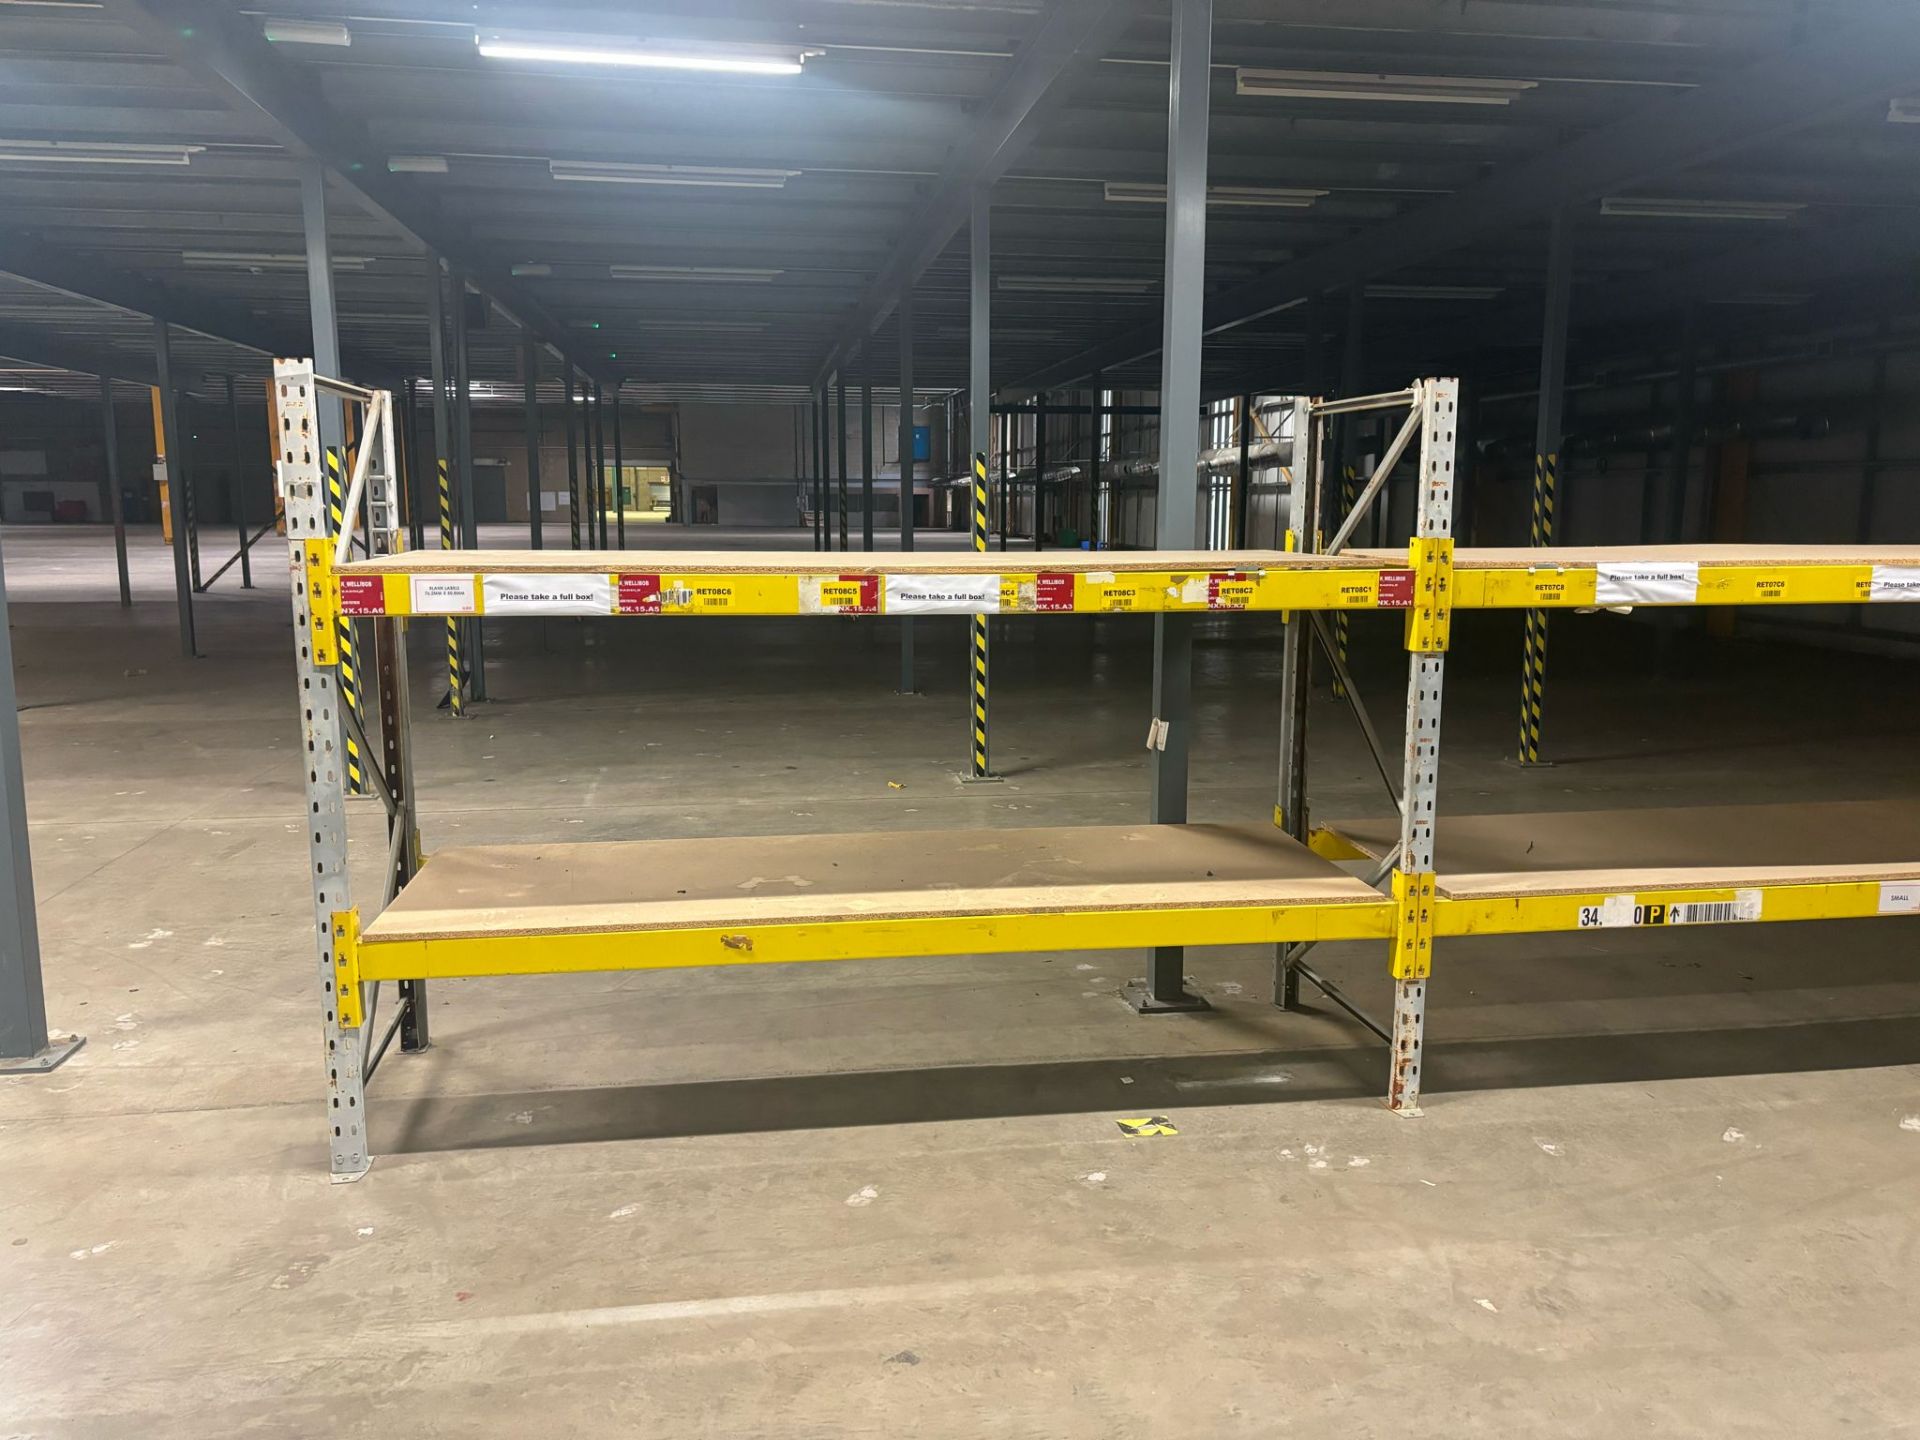 4 BAYS OF BOLTLESS METAL STEEL WAREHOUSE RACKING SHELVING UNITS - EACH BAY 285 x 90 CM - Image 3 of 3